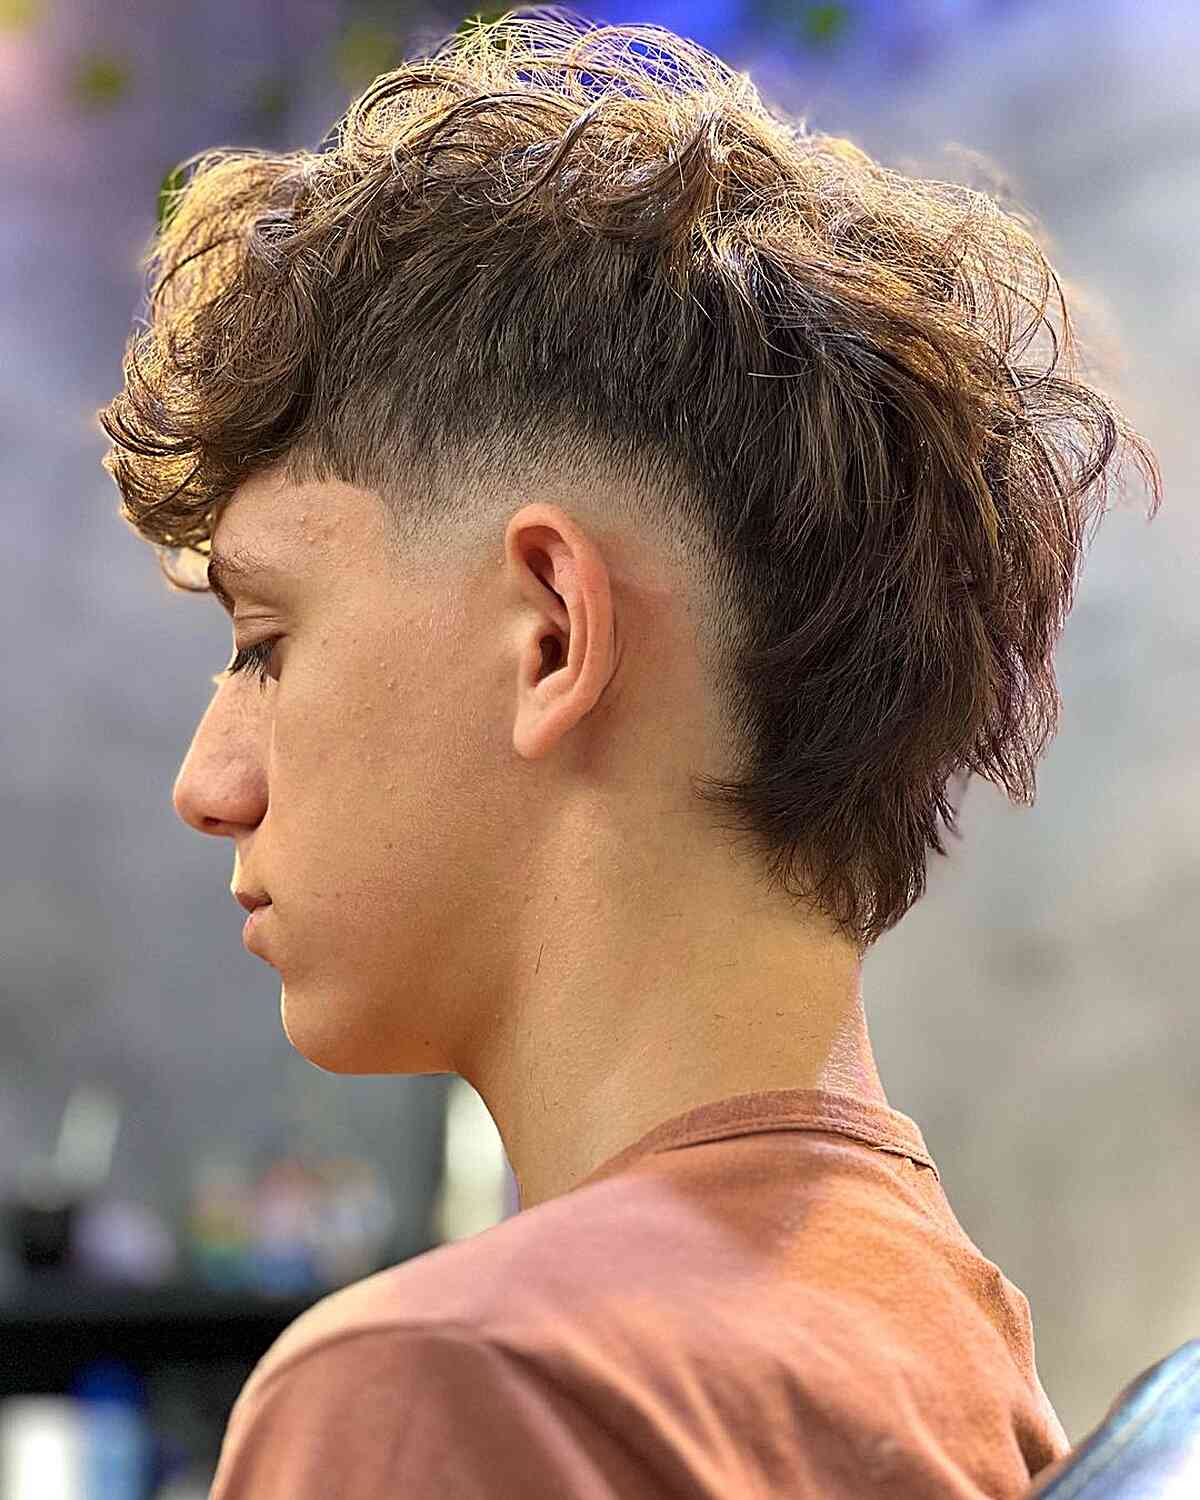 Haircuts for boys: Double crown transformation | Men's Grooming Ireland